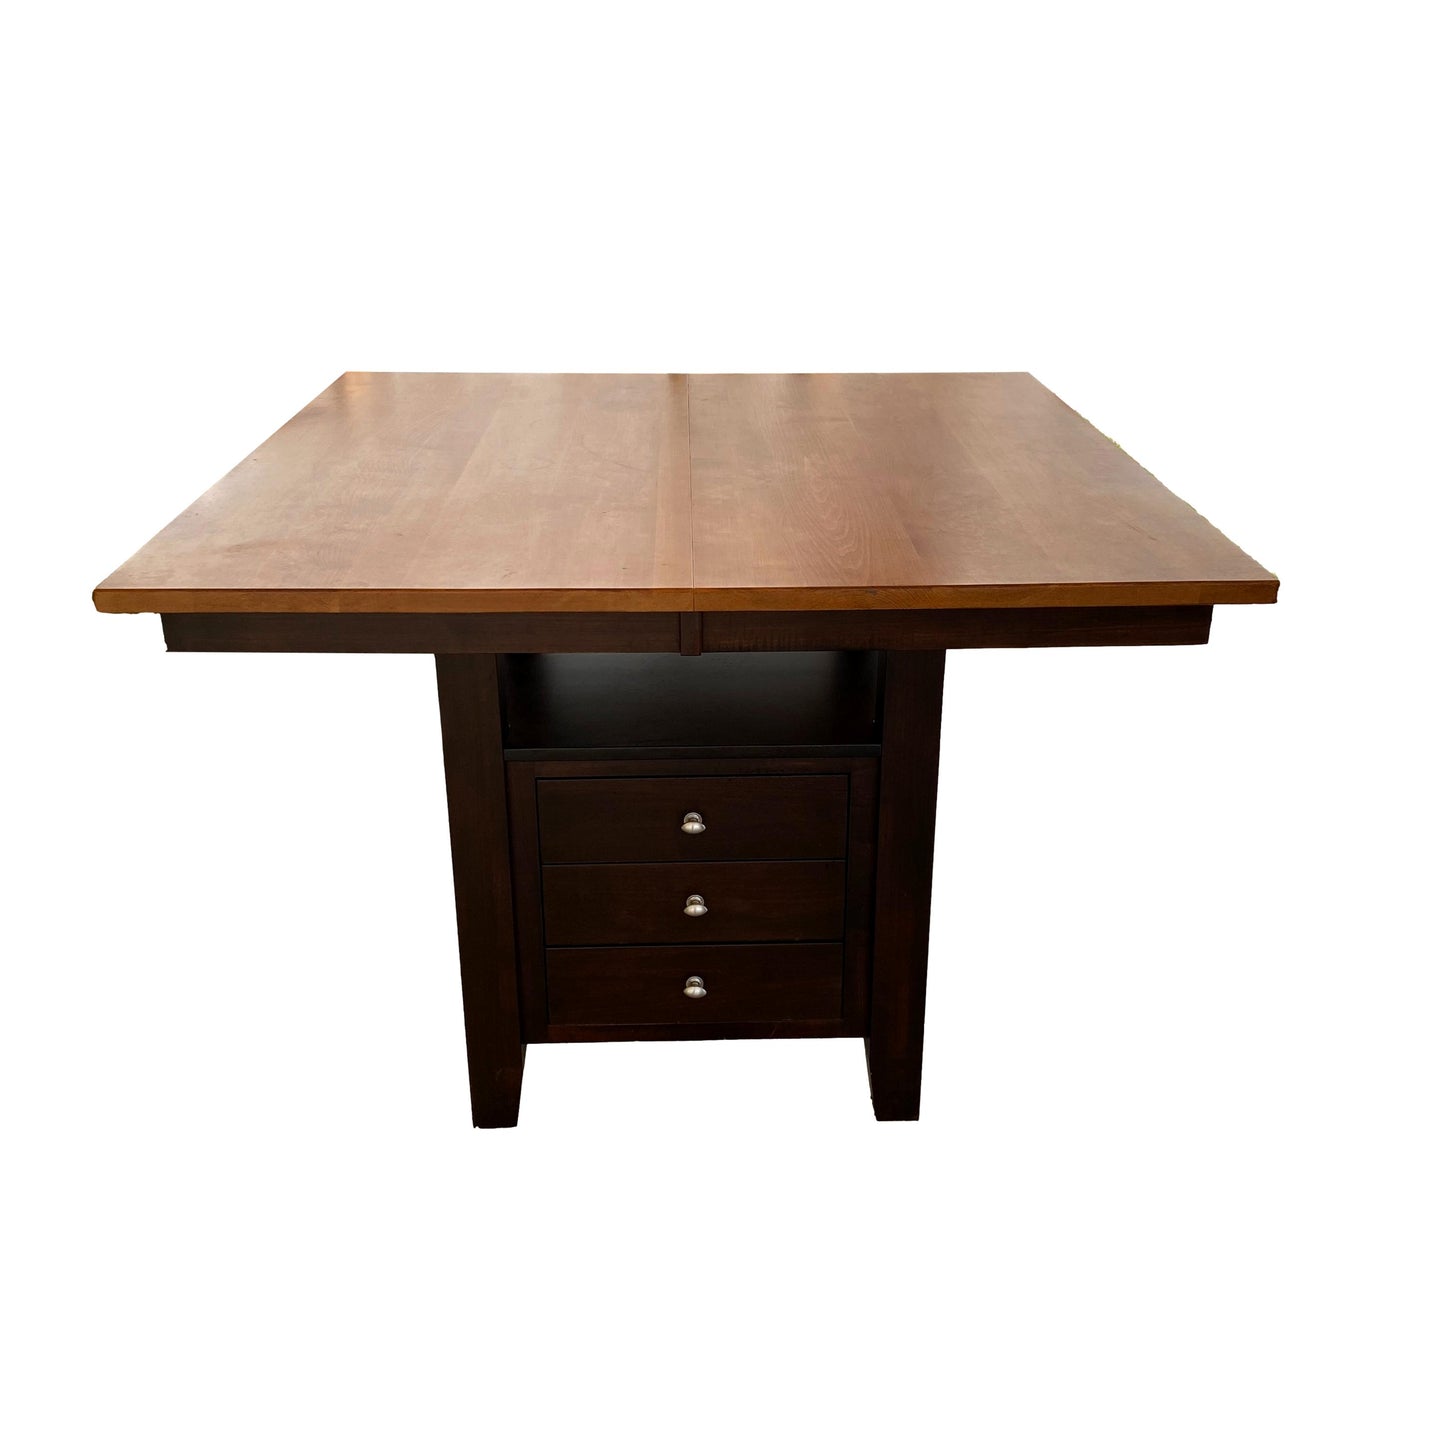 Dining Table with Butterfly Leaf